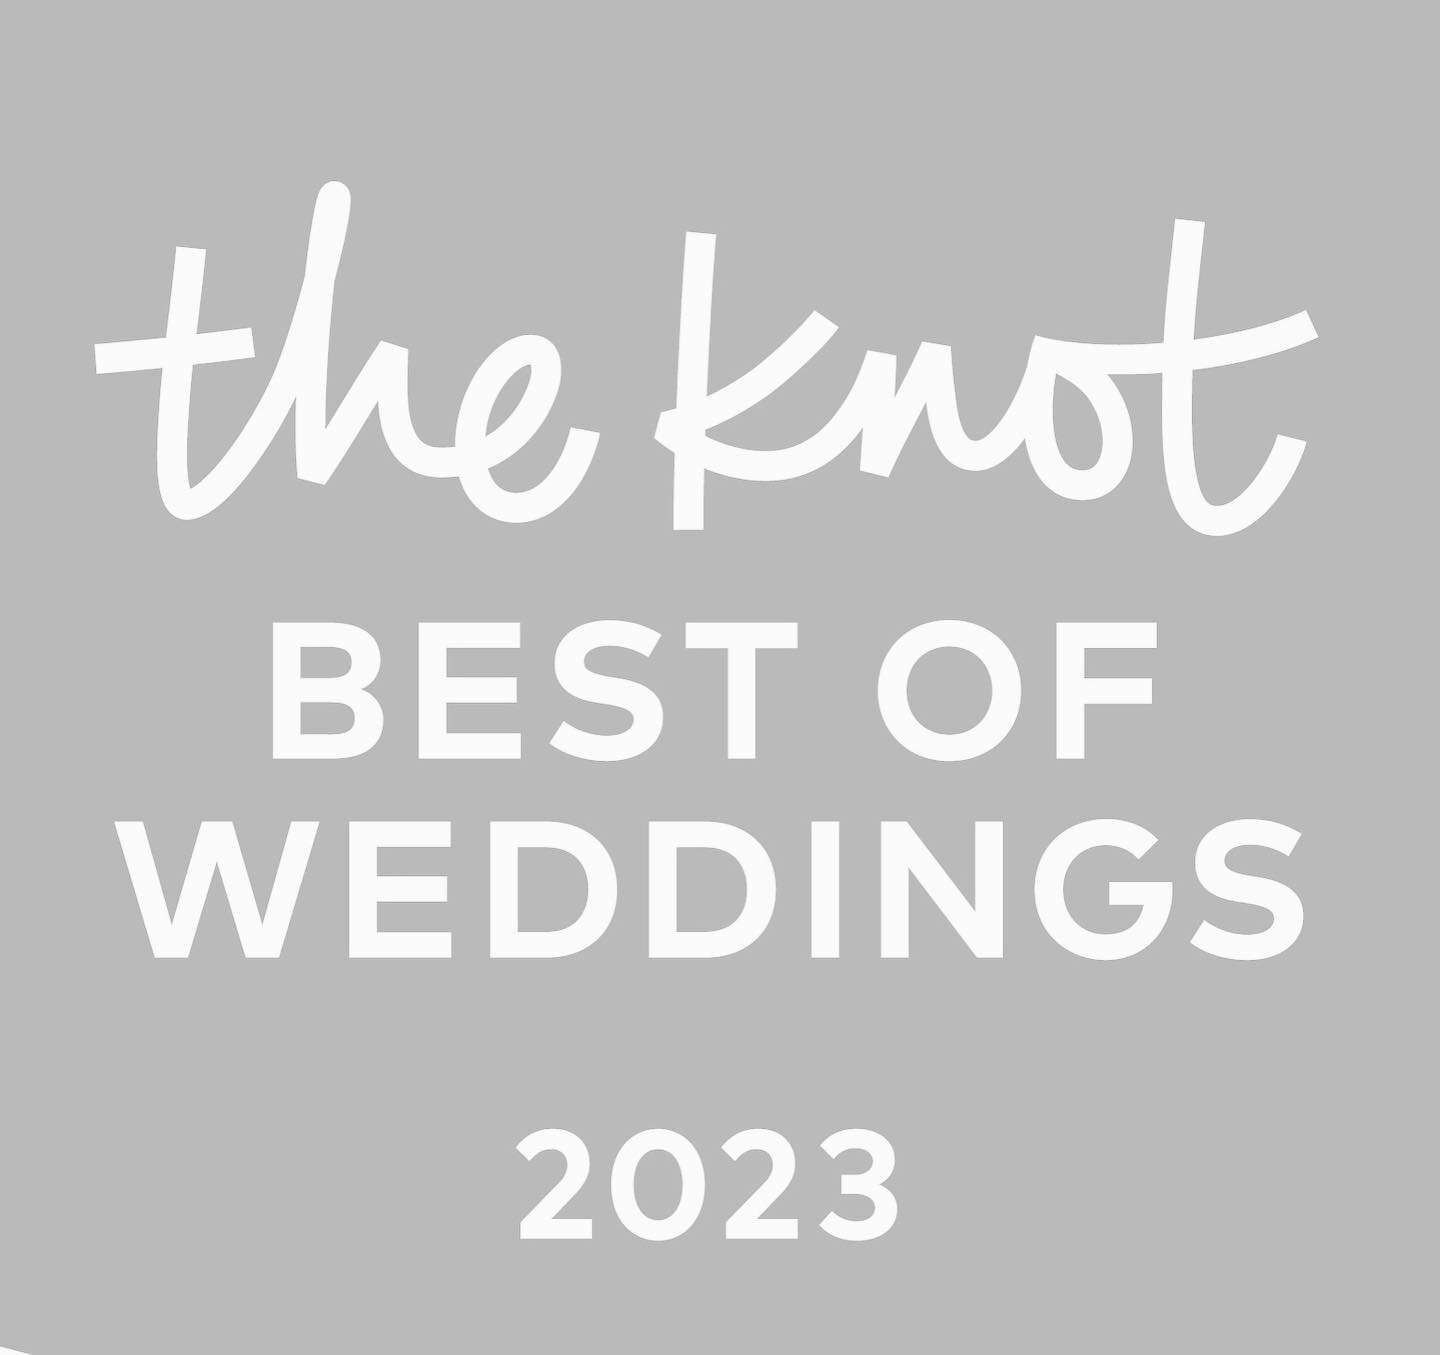 Well this was some fun news to receive today! A huge &ldquo;thank you&rdquo; to every one of my couples who took the time to write such kind, heartfelt reviews!! I truly feel like I have the BEST couples.🧡

#bestoftheknot #localbusiness #bestcouples